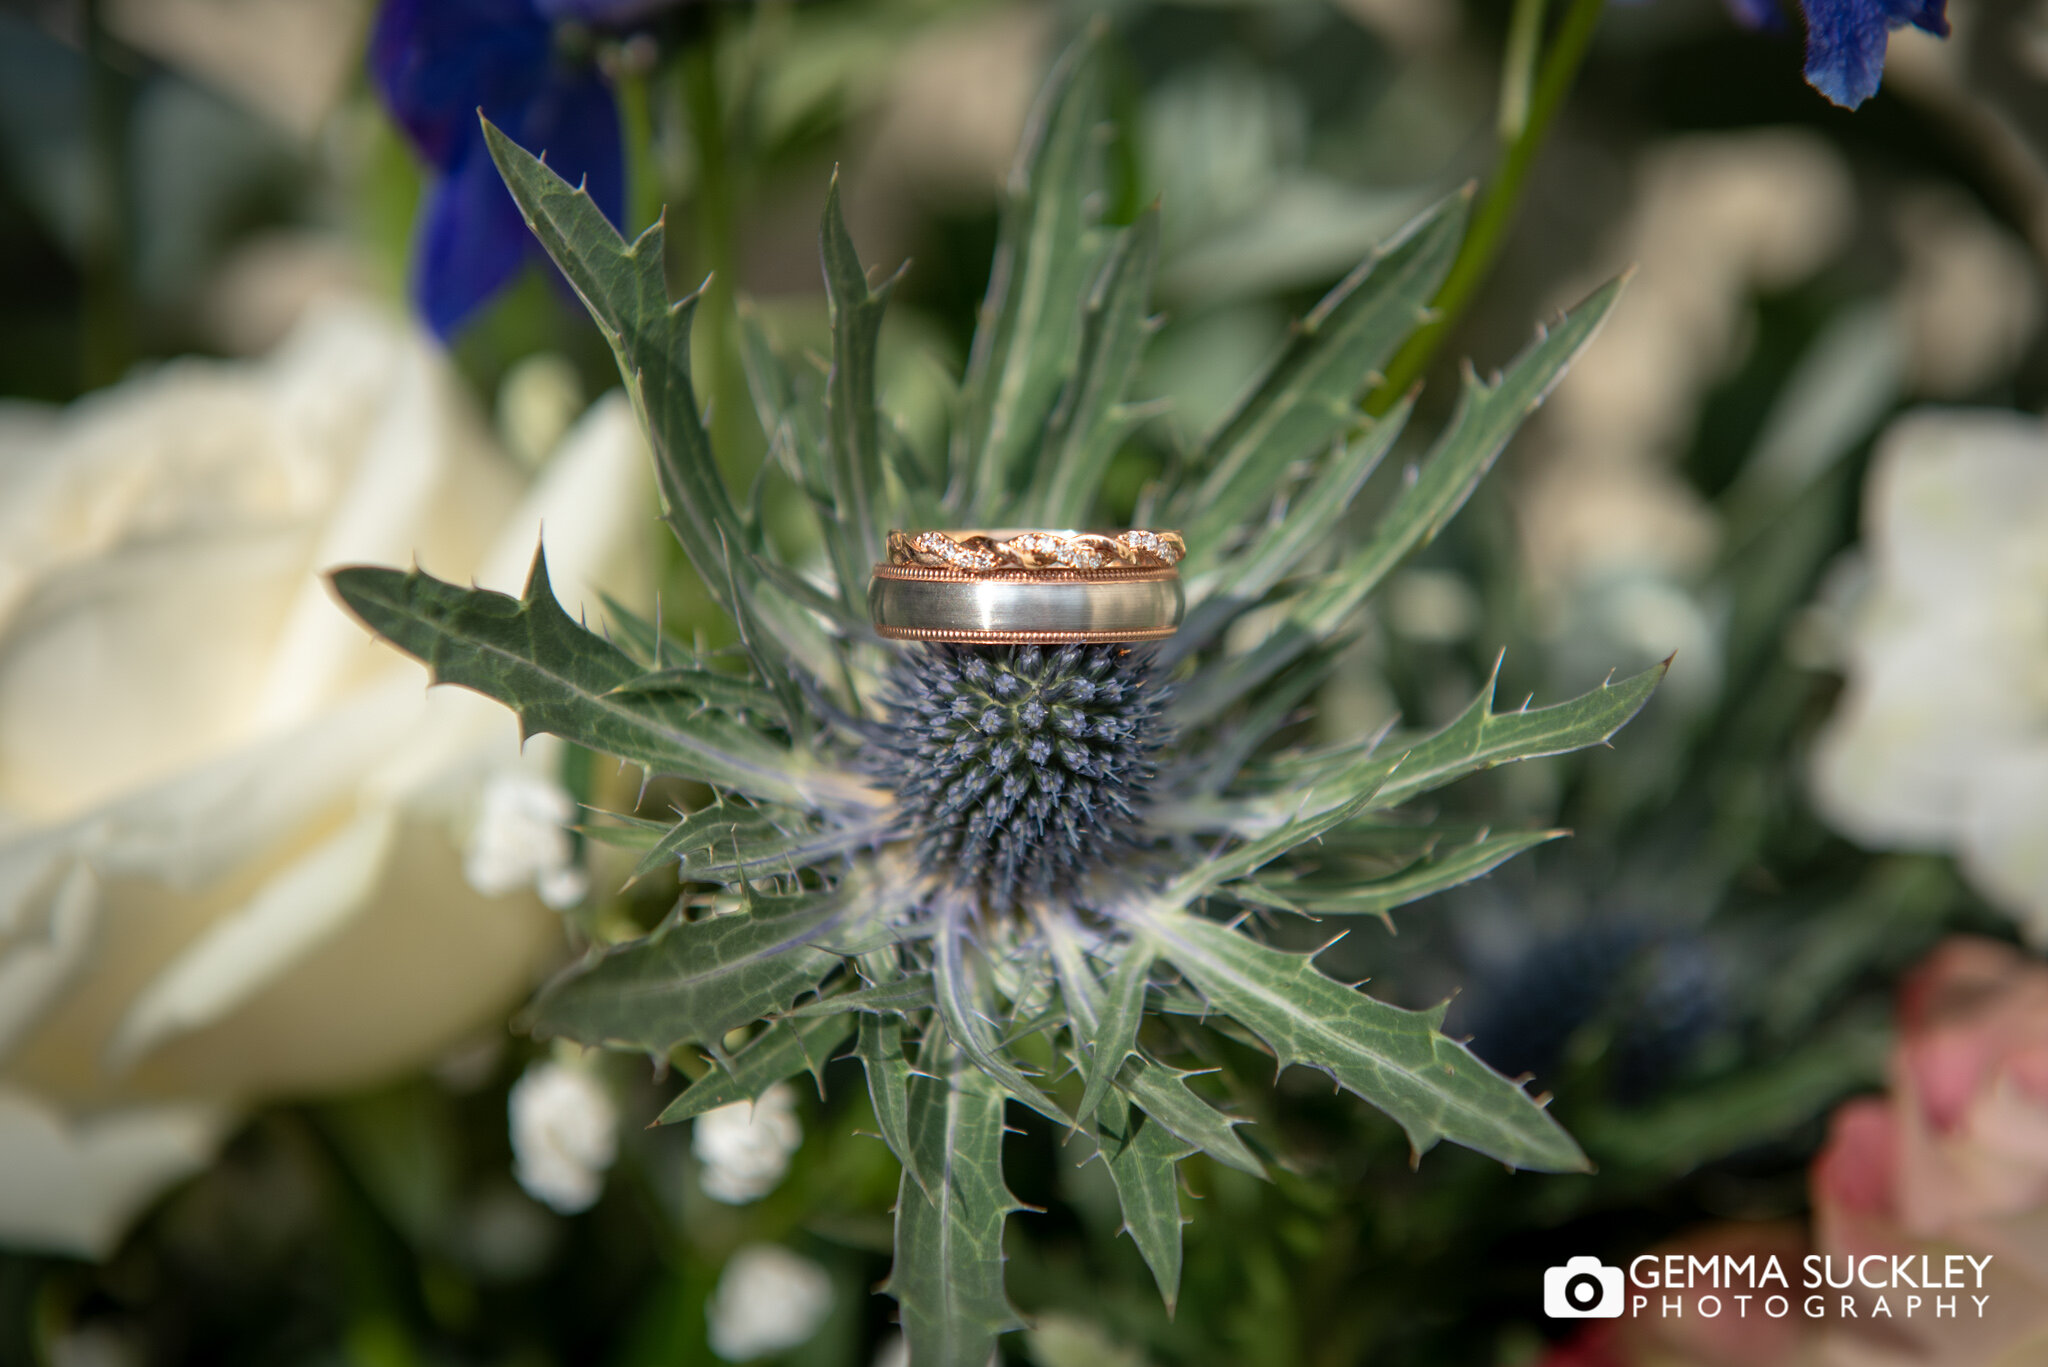 close up photo of the wedding rings placed on a thistle